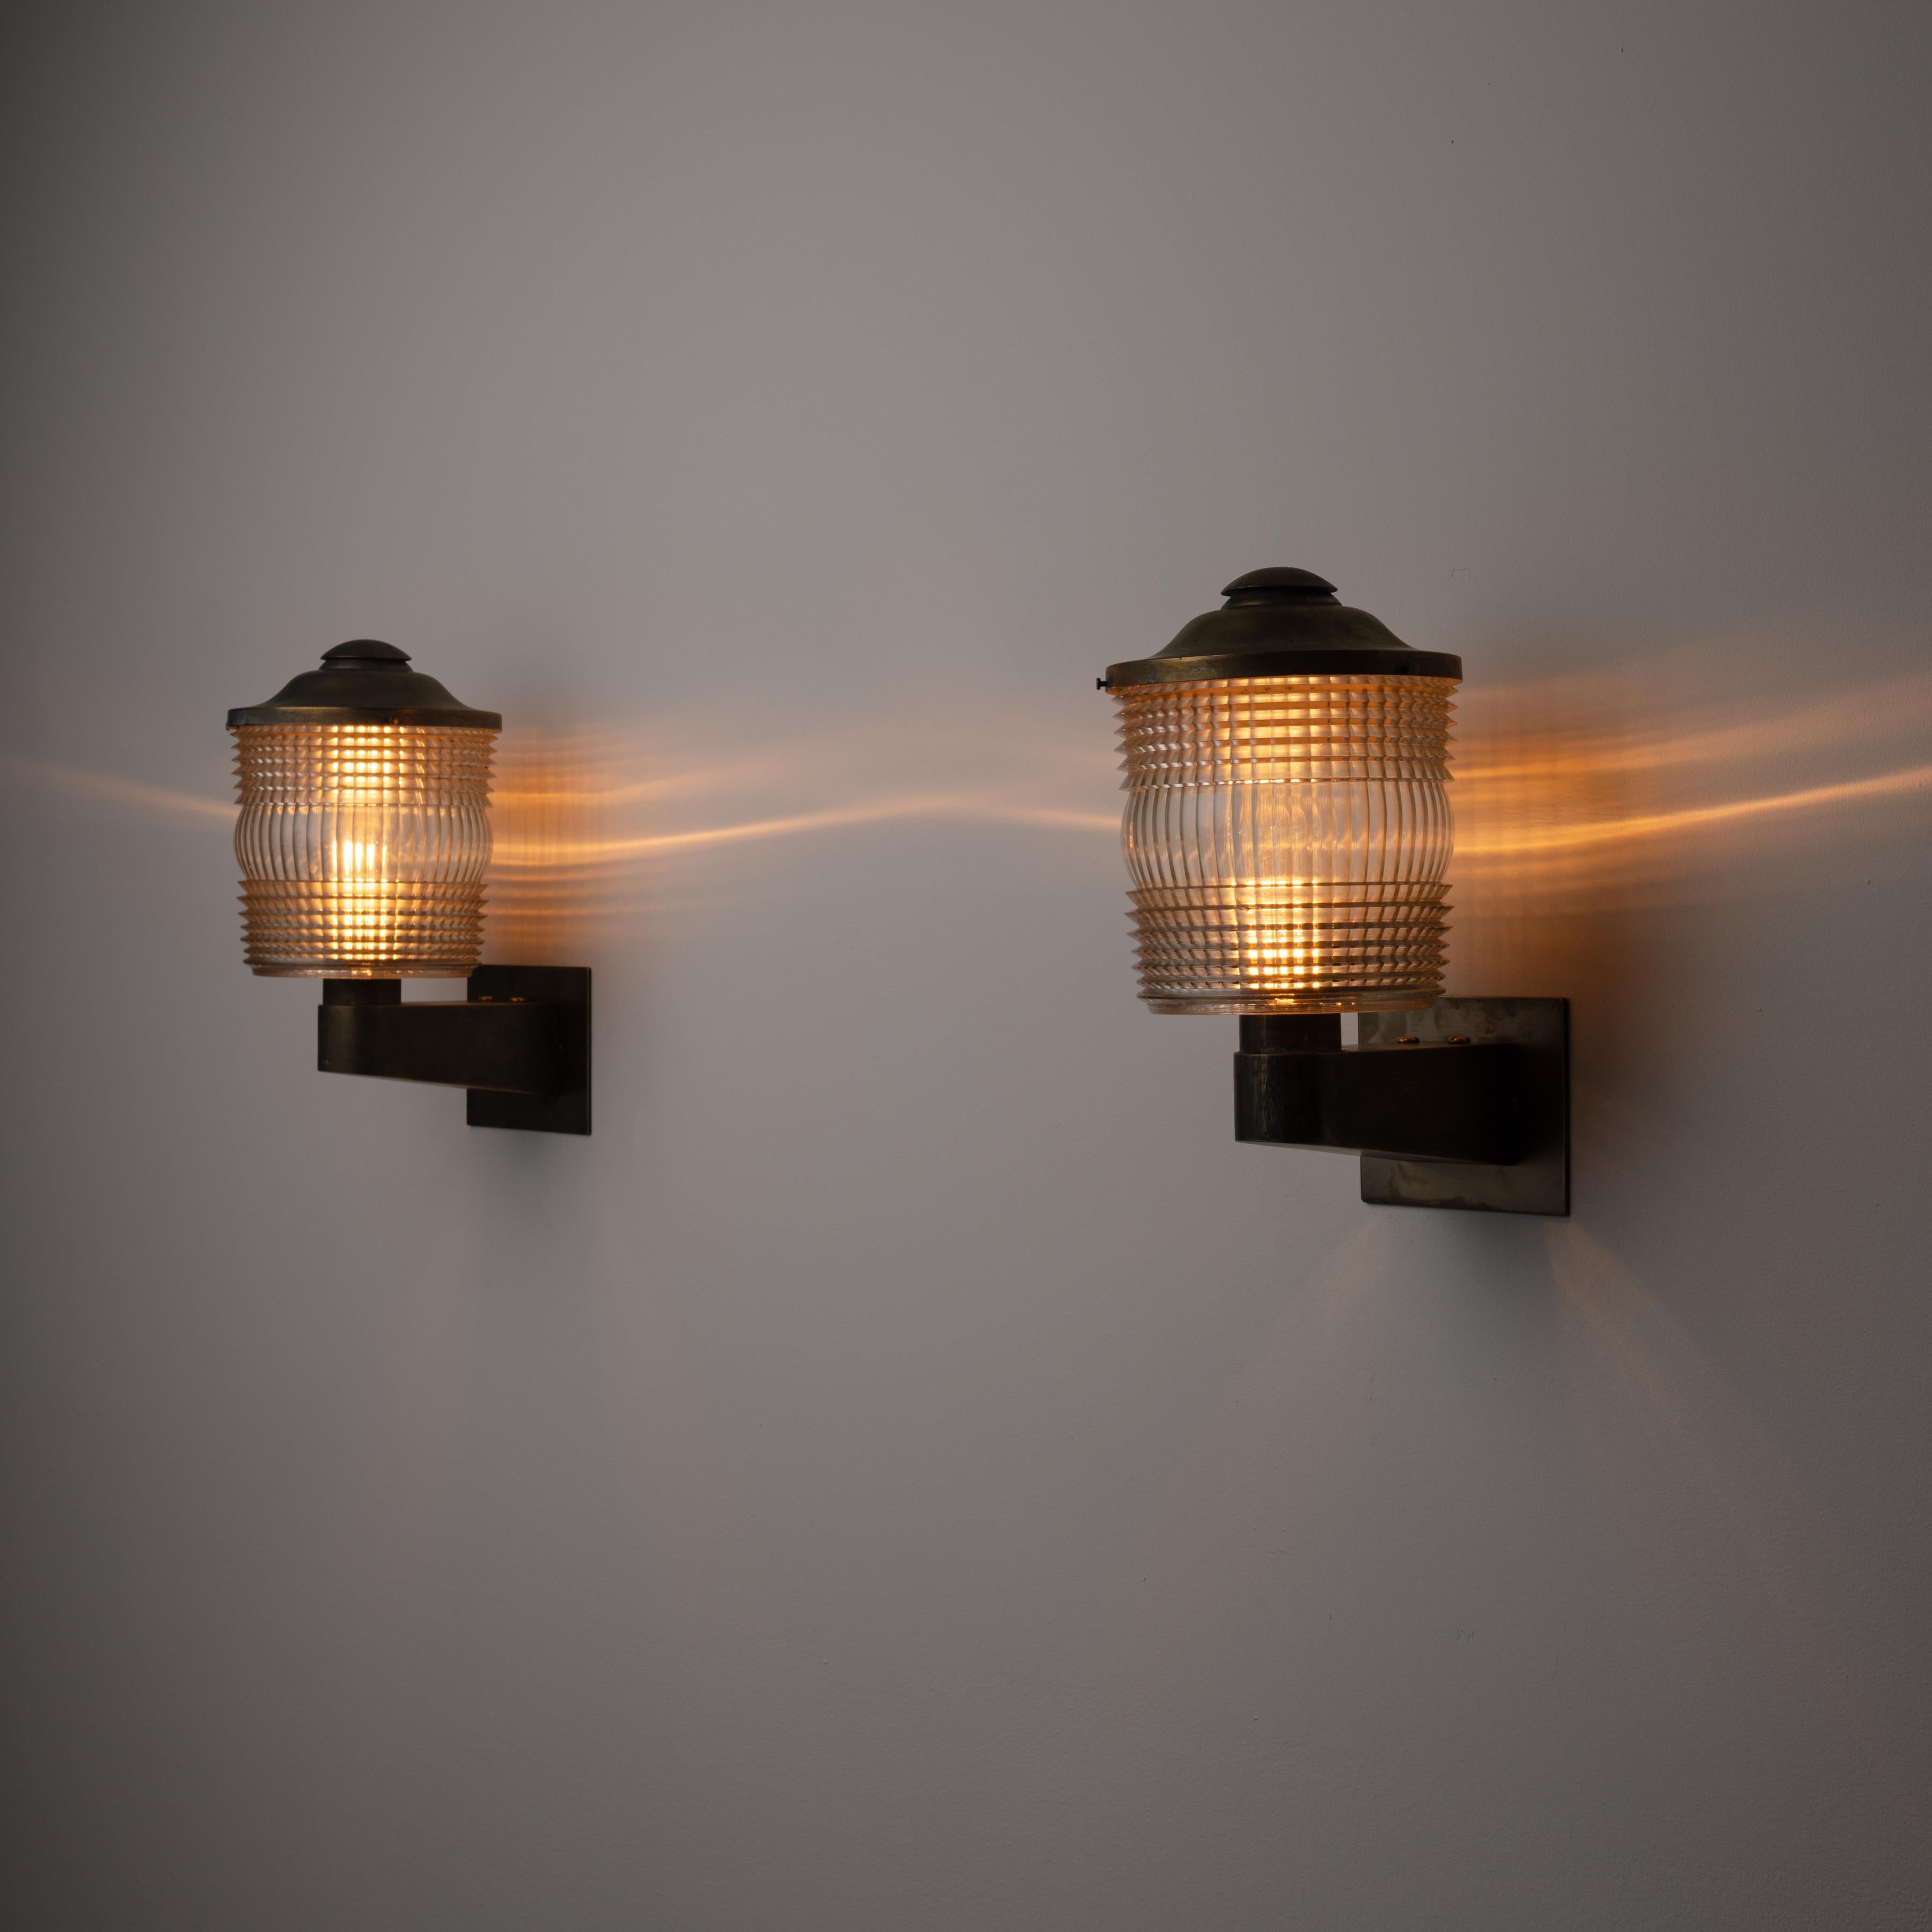 Pair of Sconces by Atelier Jean Perzel. Designed and manufactured in France, circa 1940. Industrial, lantern-like wall sconces with sturdy brass frame and custom textured glass diffusers. Each sconce holds two E27 sockets, adapted for the US. We